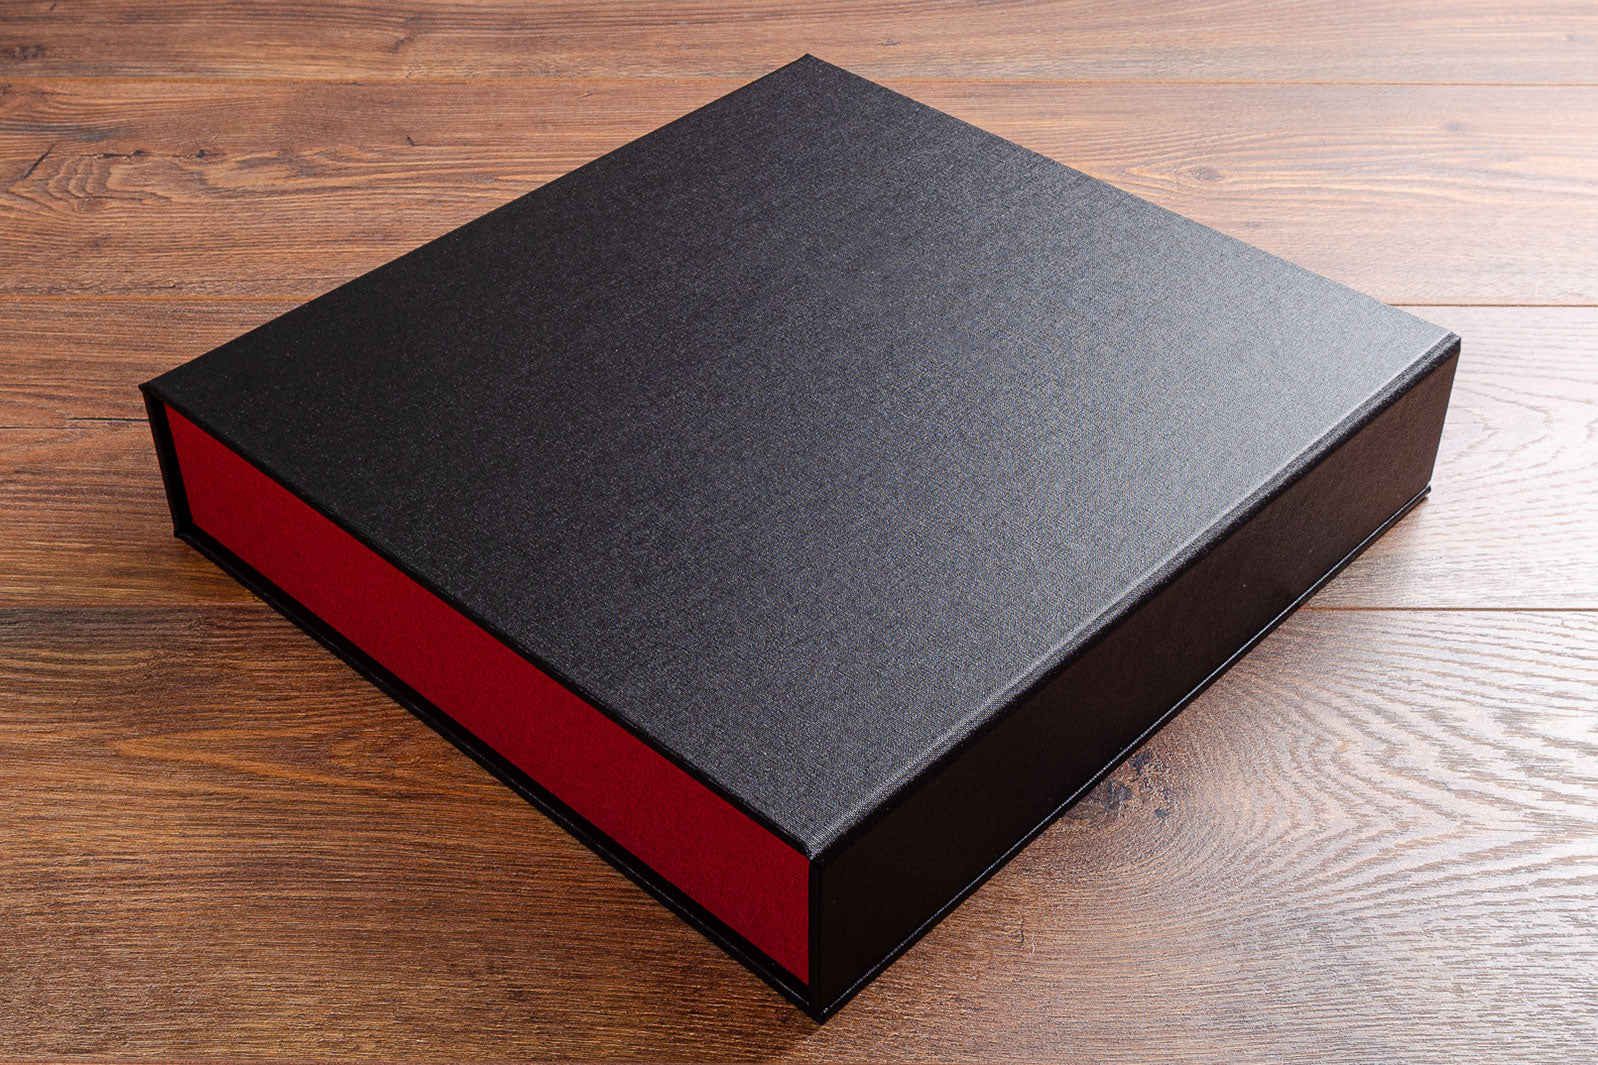 Ring binder box file A4 size with 4 ring D binder in black and red